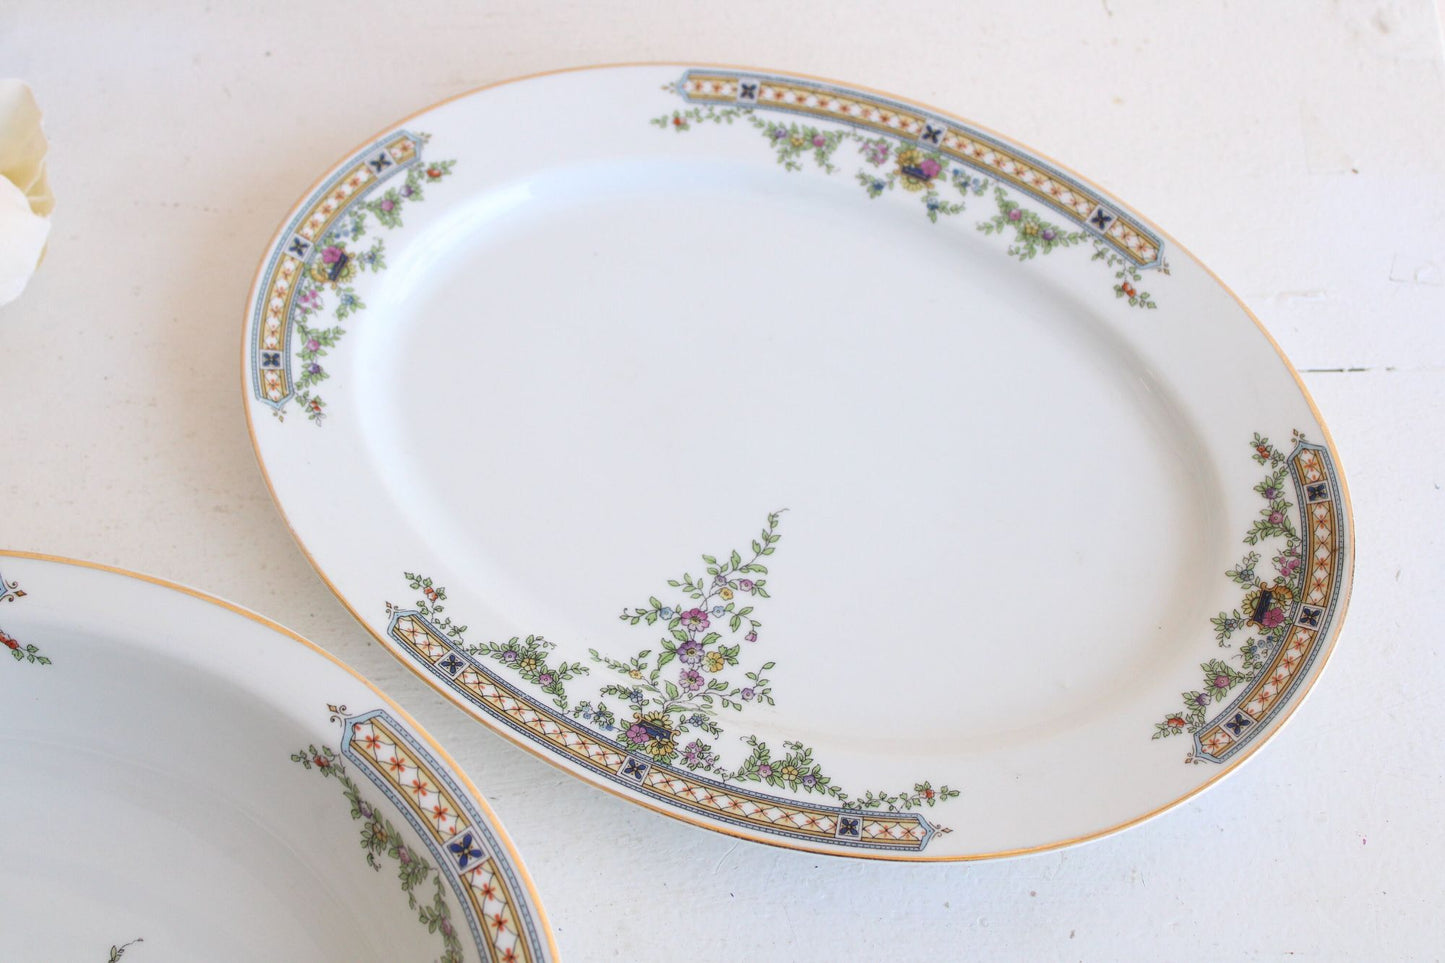 Vintage 1940s Serving Bowl and Plate, 10" and 12" Oval Heinrich & Co Selb Bavaria China Floral Pattern